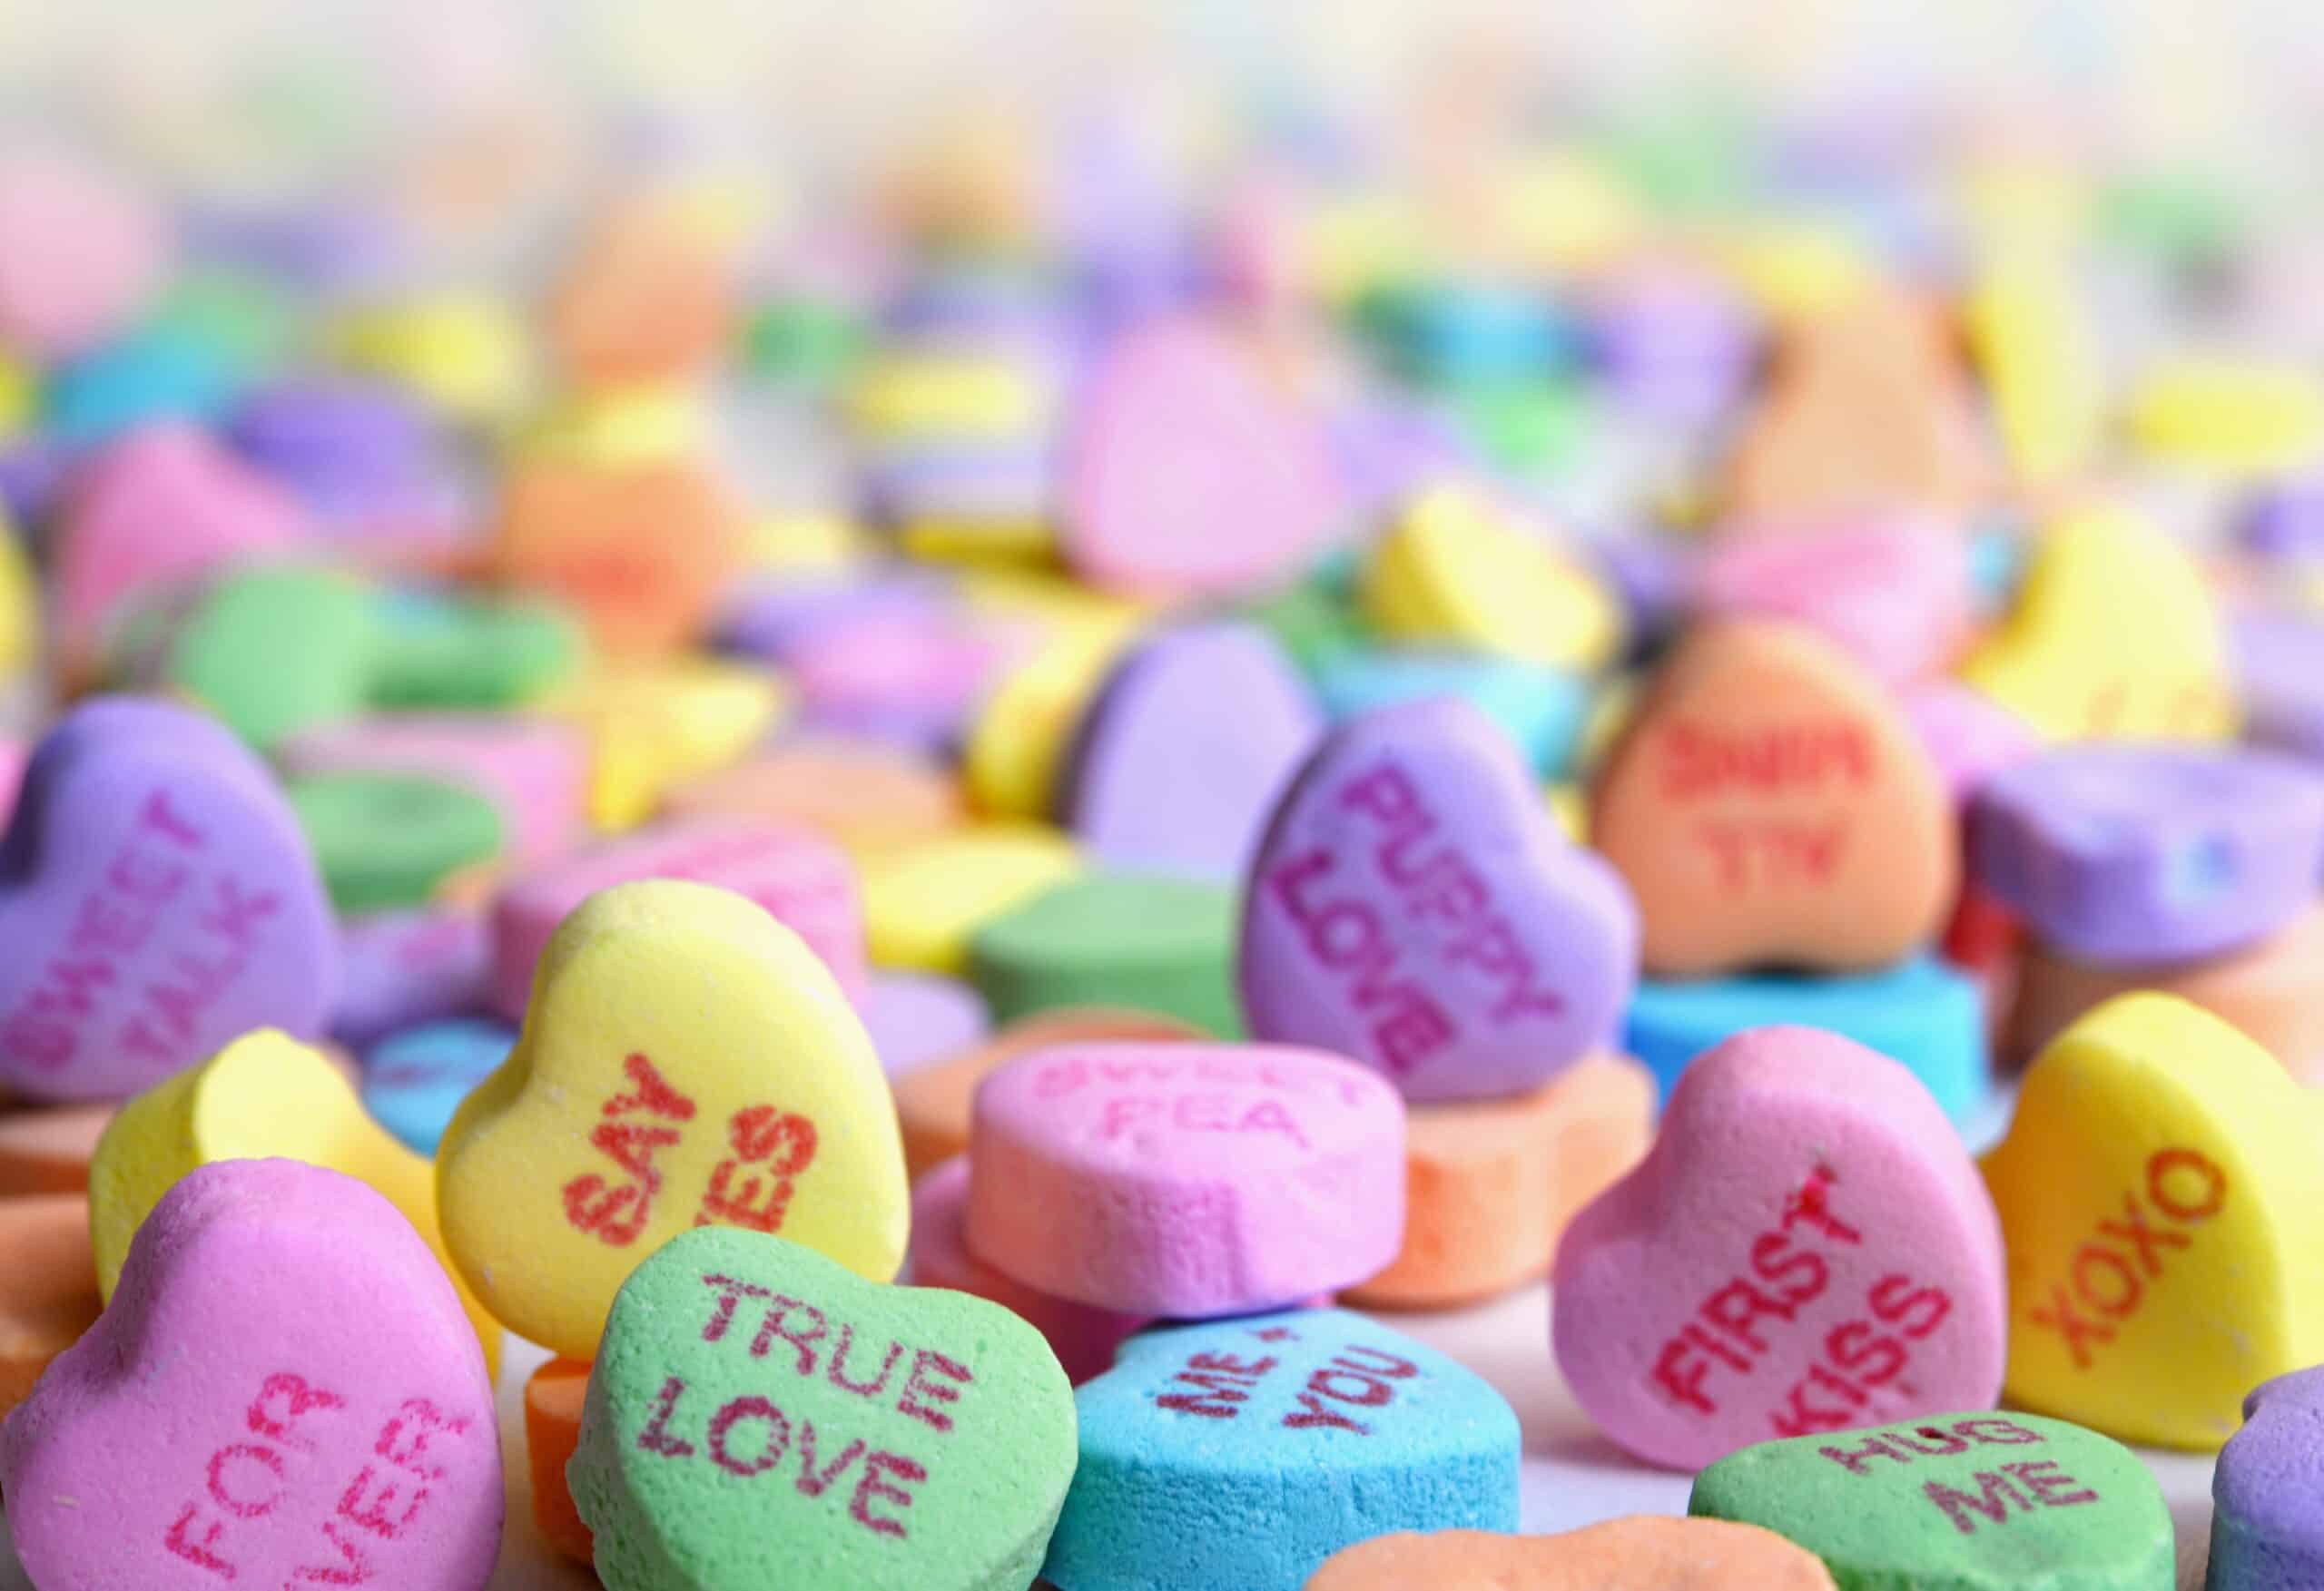 5 Reasons Cleaning Services Could Be the Perfect Valentine's Day Gift